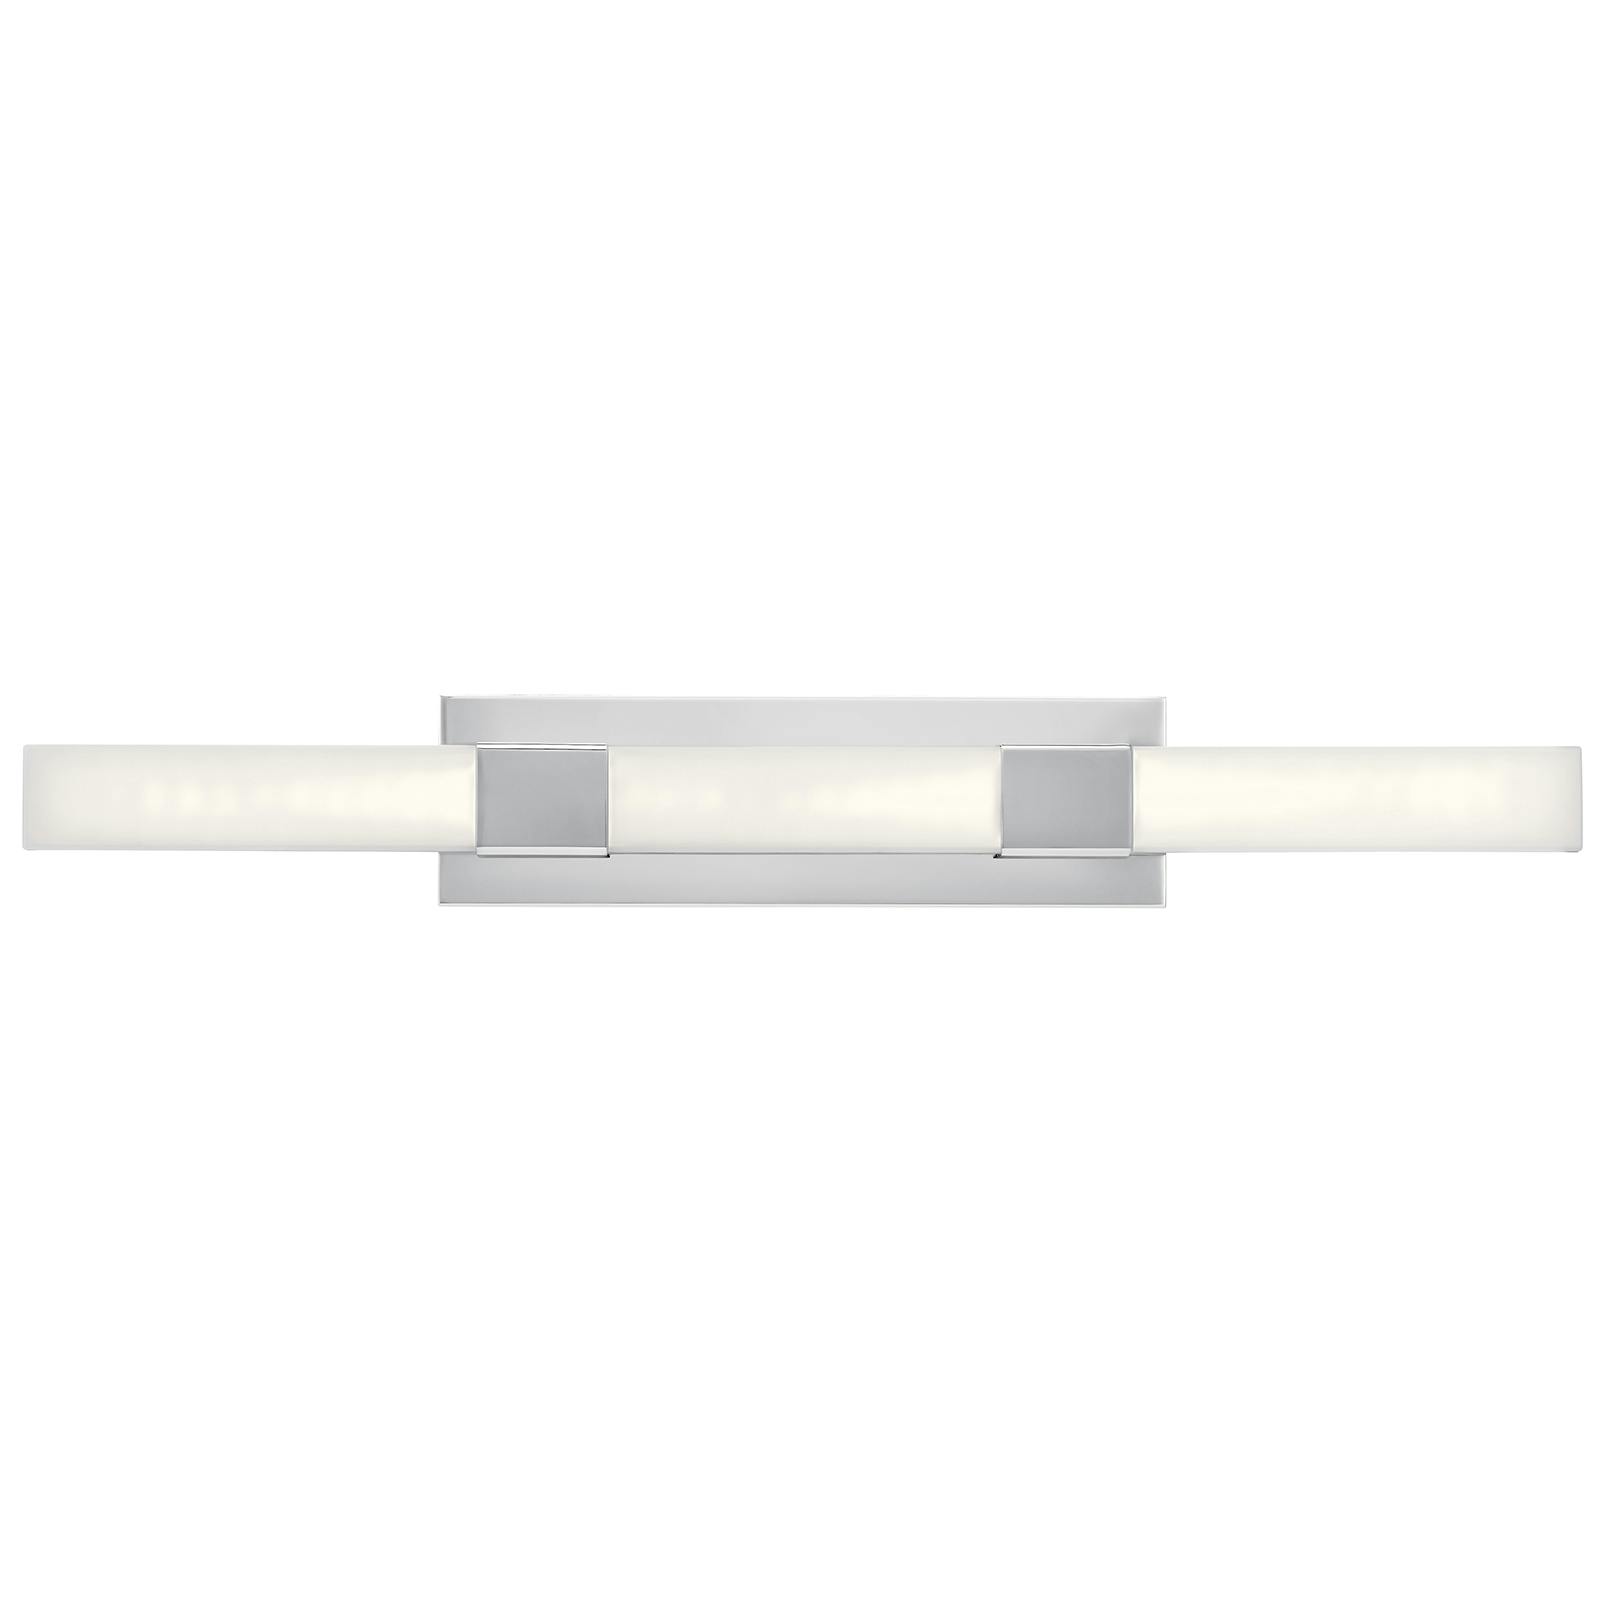 Front view of the Neltev™ 36.25" LED Vanity Light Chrome on a white background